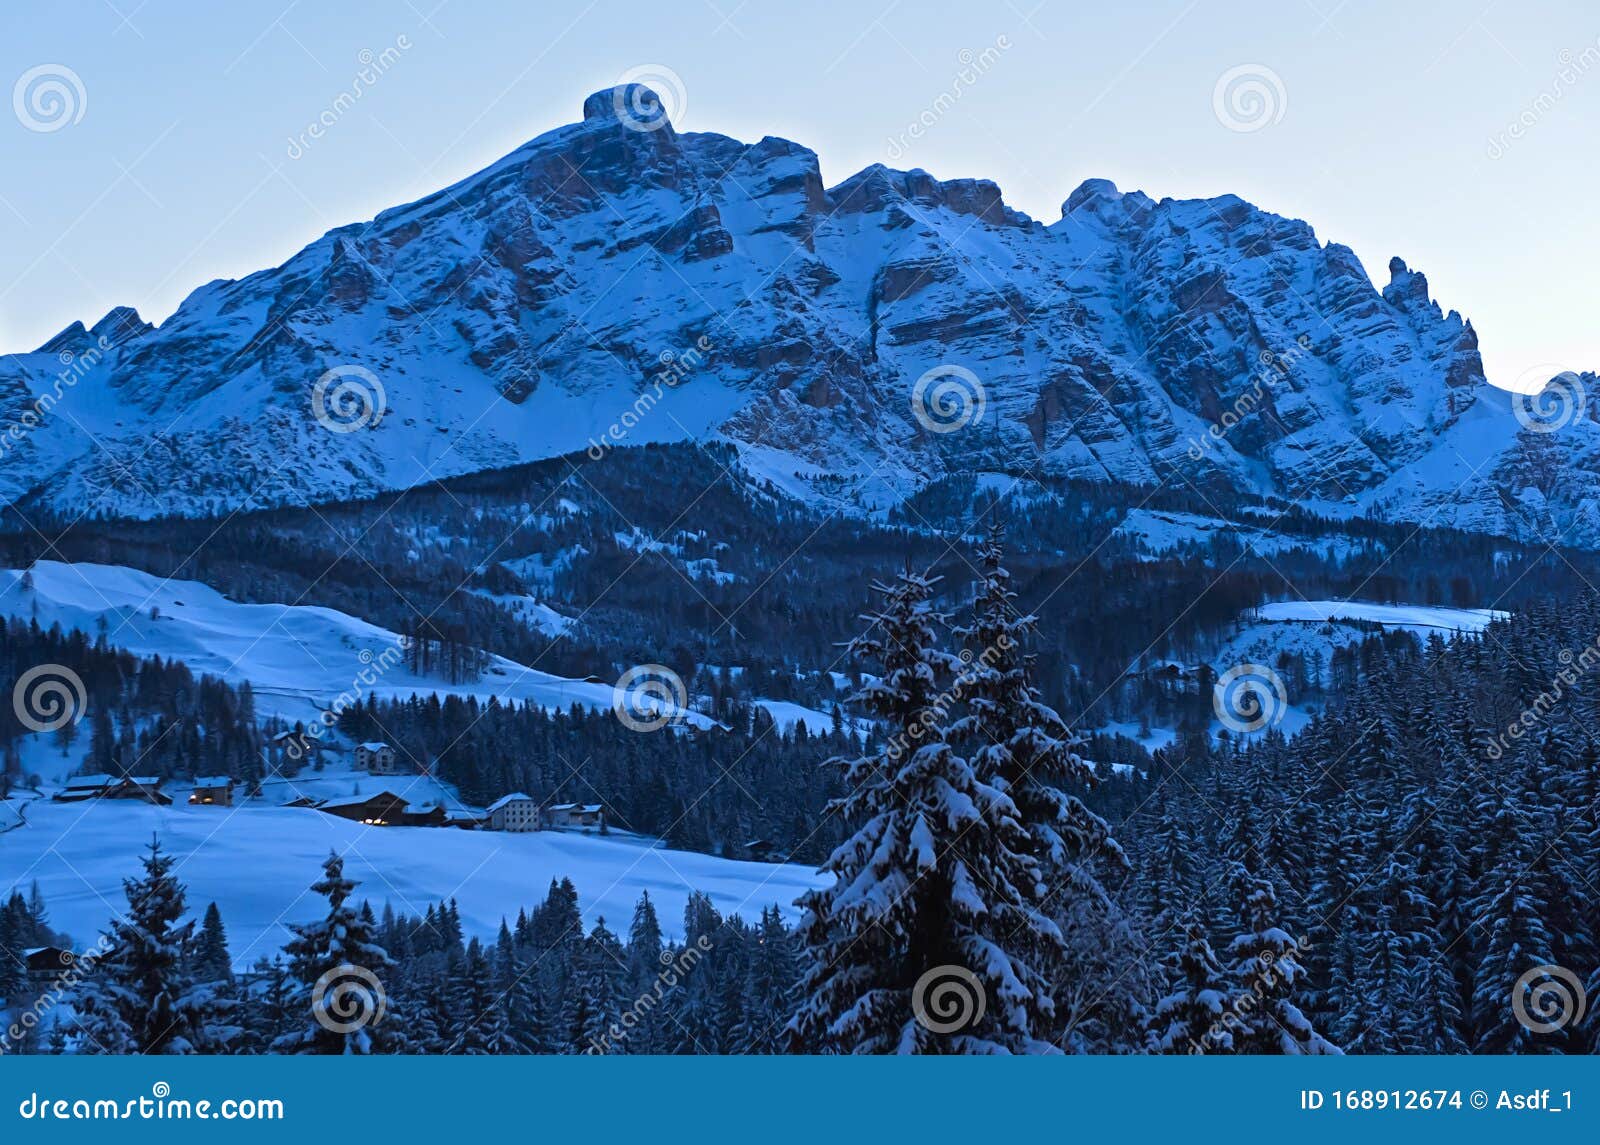 evening shadows on a cold winter day in the dolomites mountains